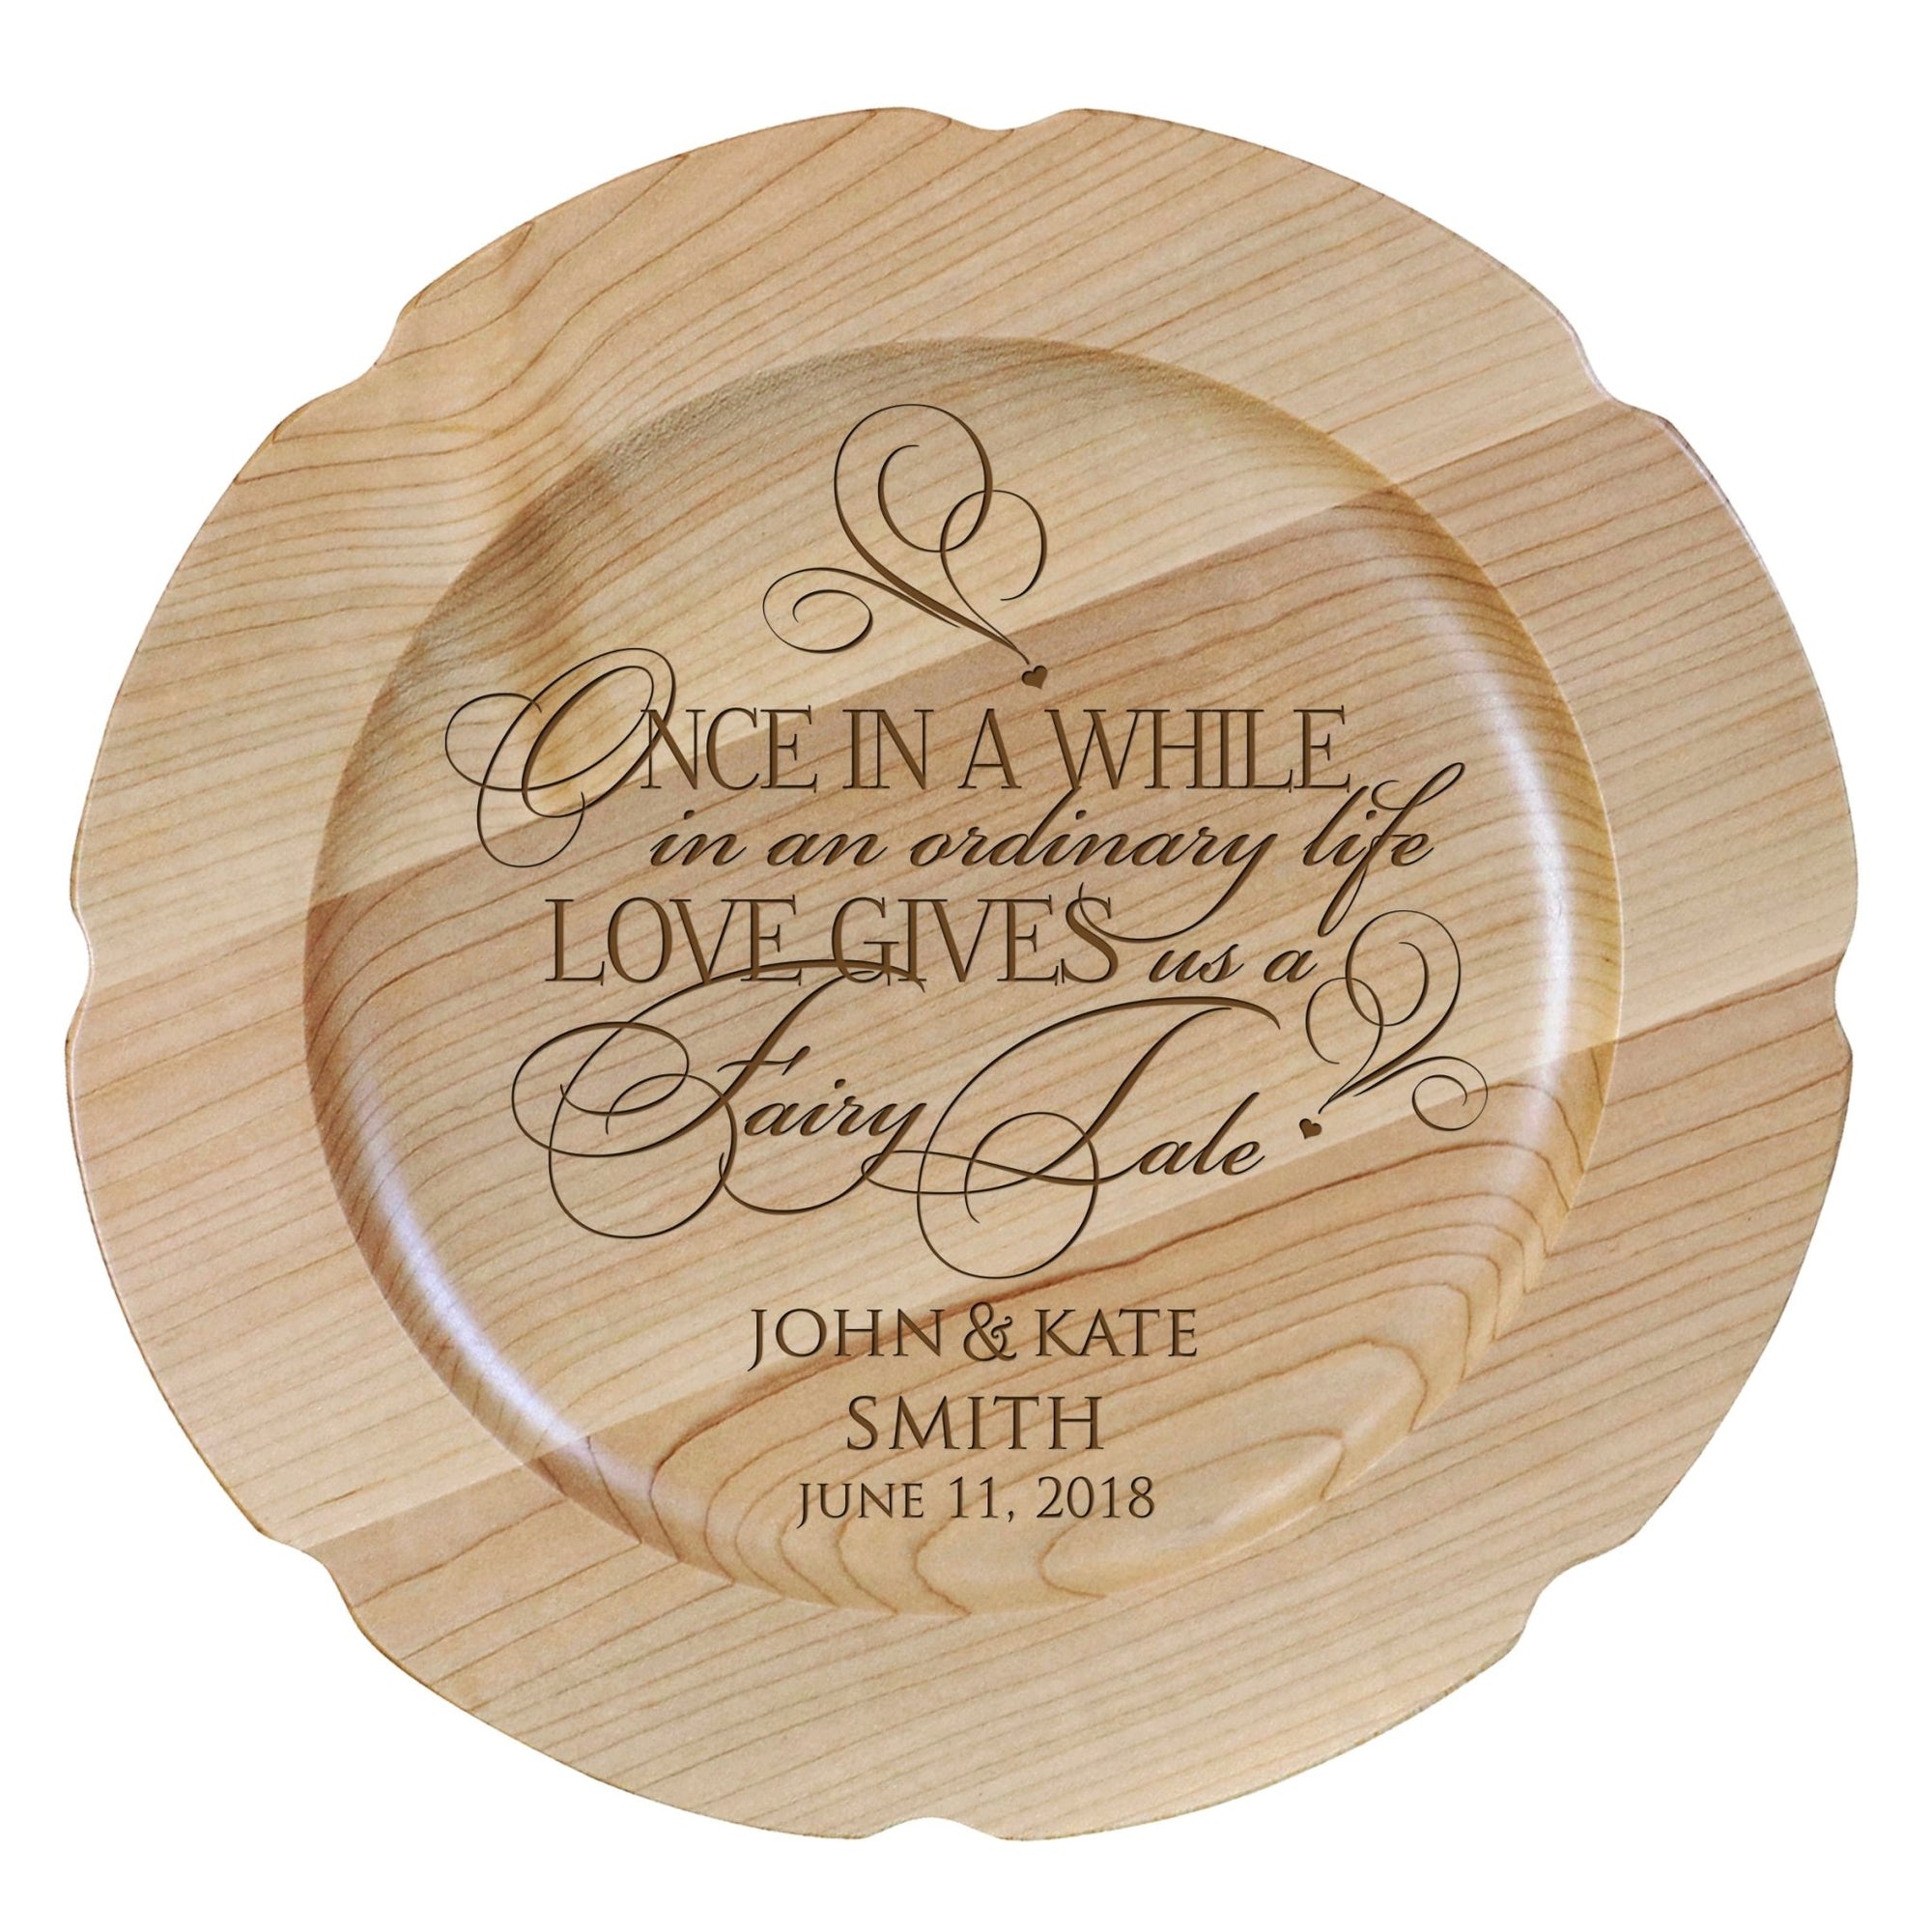 Personalized Inspirational Plates With Quotes - Once In A While - LifeSong Milestones